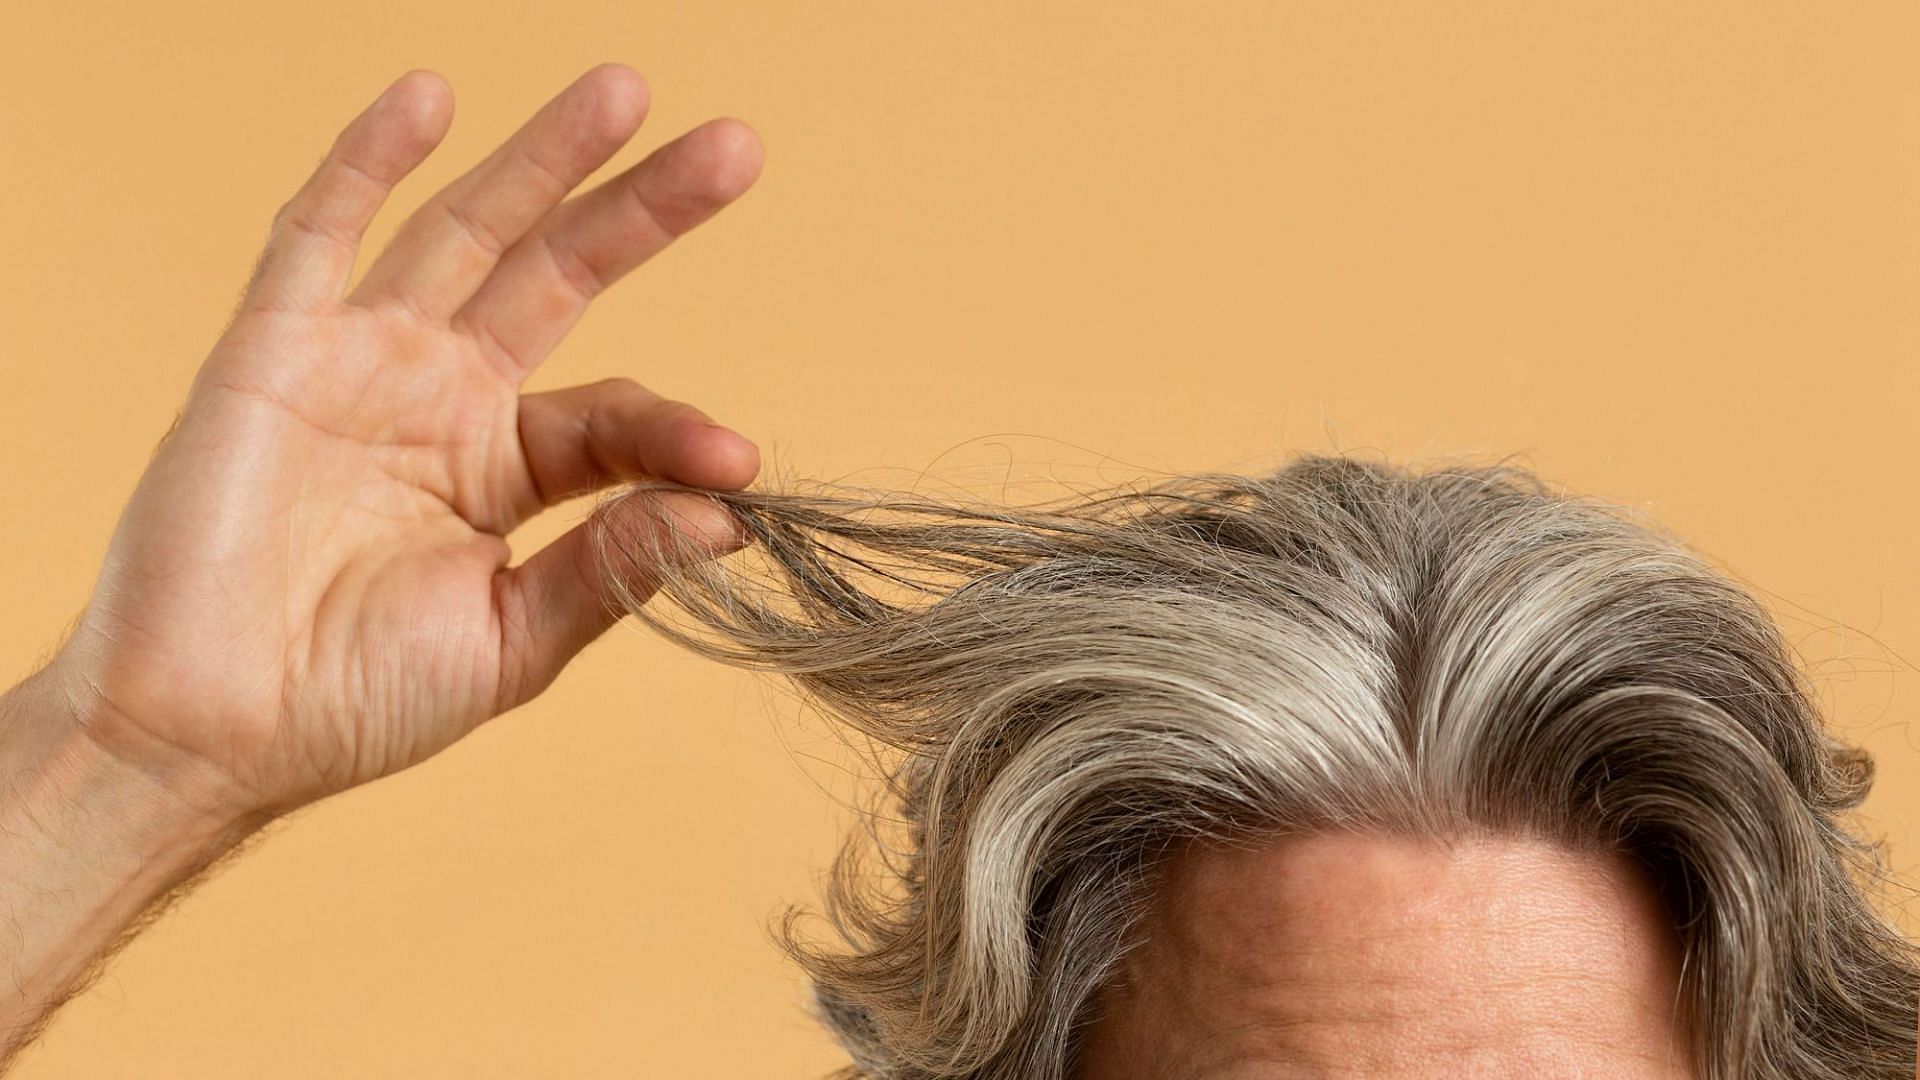 Baking soda can contribute in removing the excess buildup in hair (Image by Freepik)